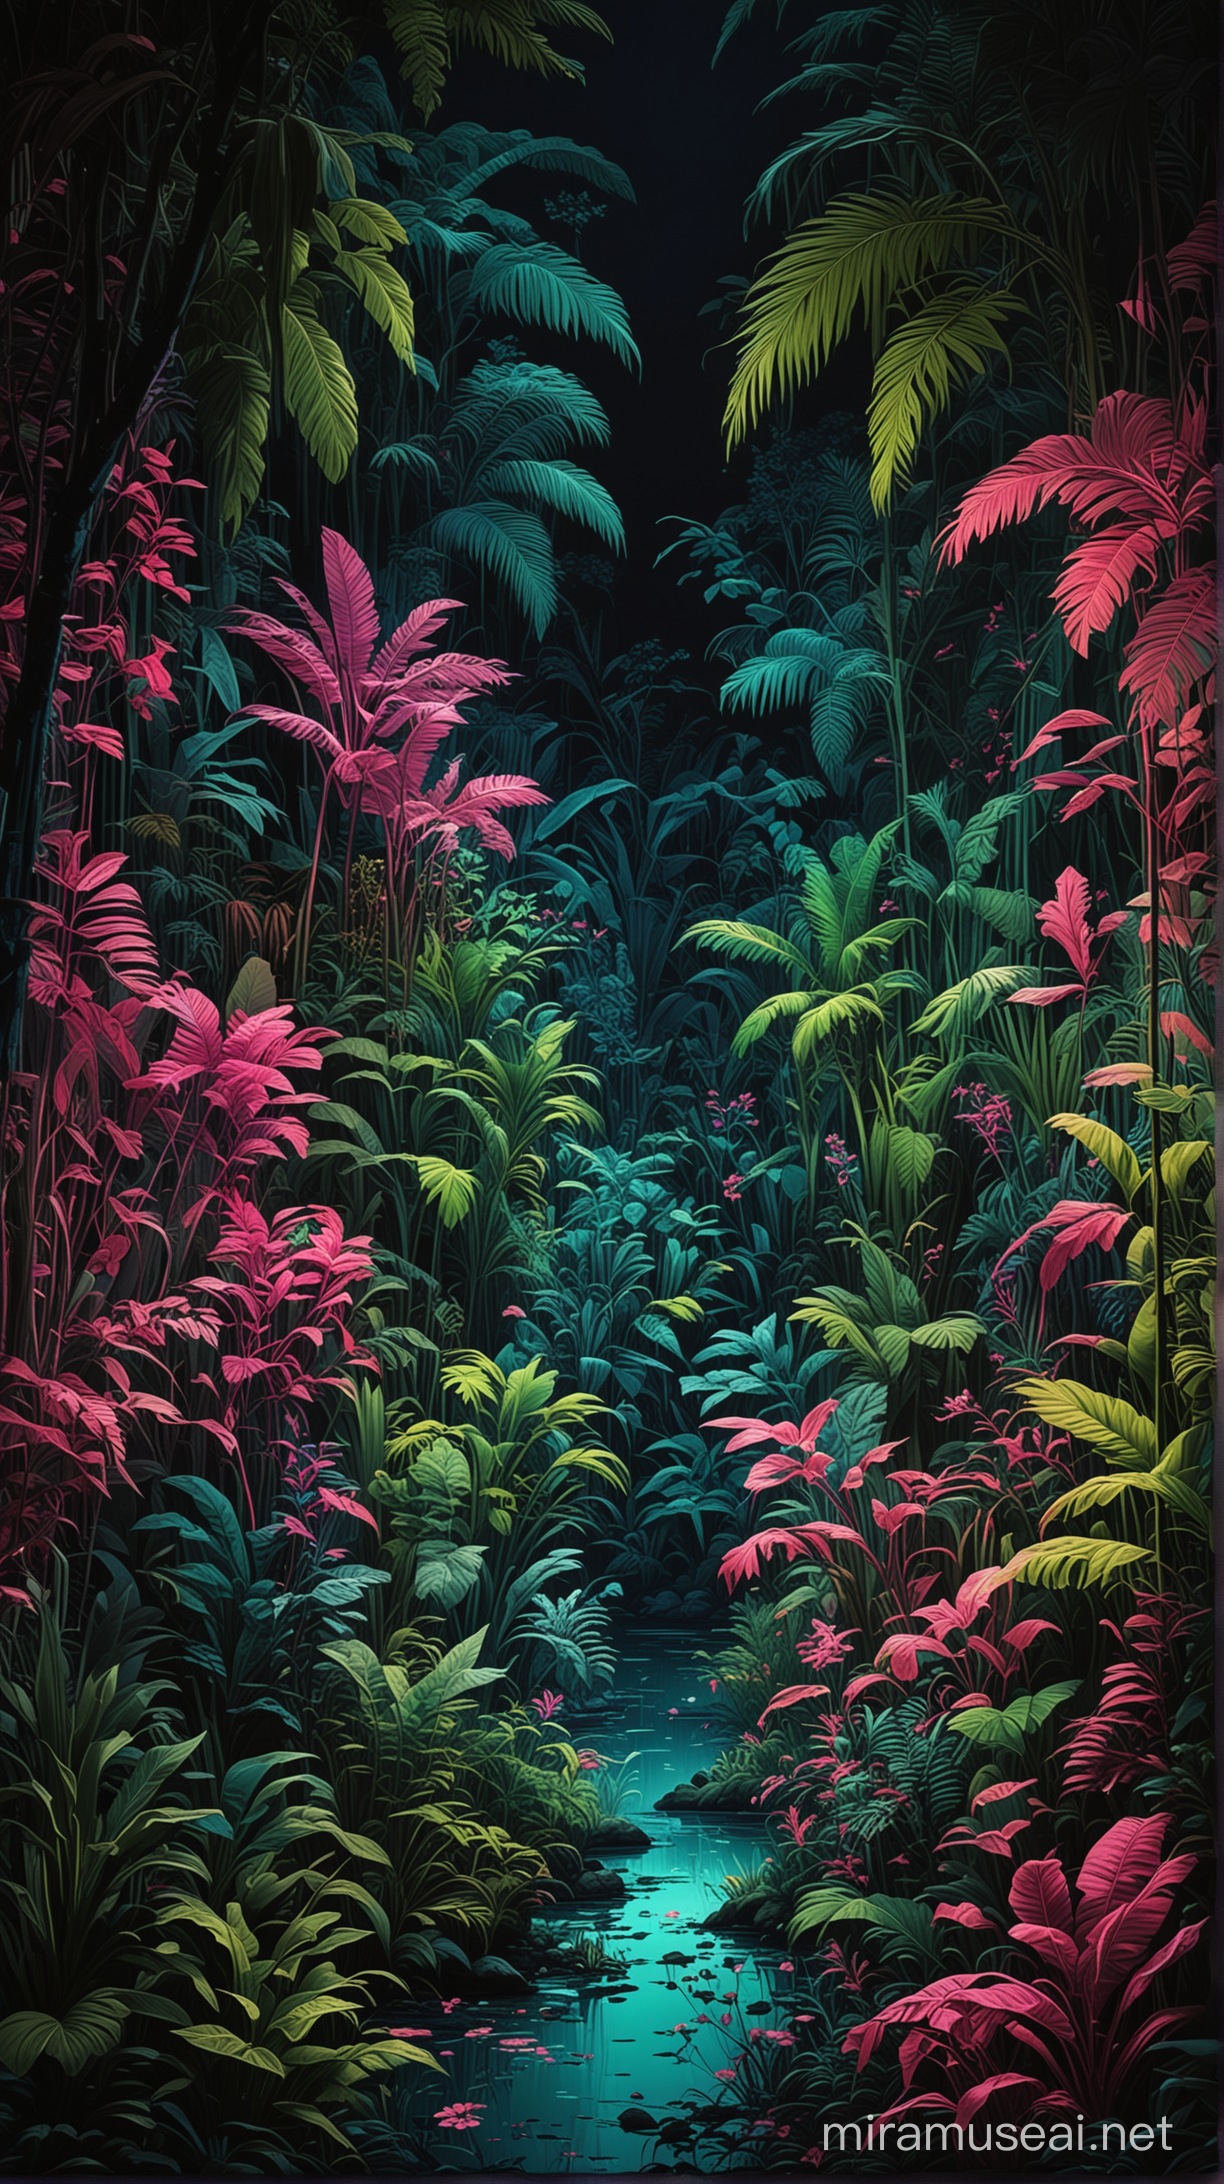 A dense jungle under the cover of night, illuminated only by vibrant neon lights in shades of green, pink, and blue that outline the silhouettes of exotic plants and animals.